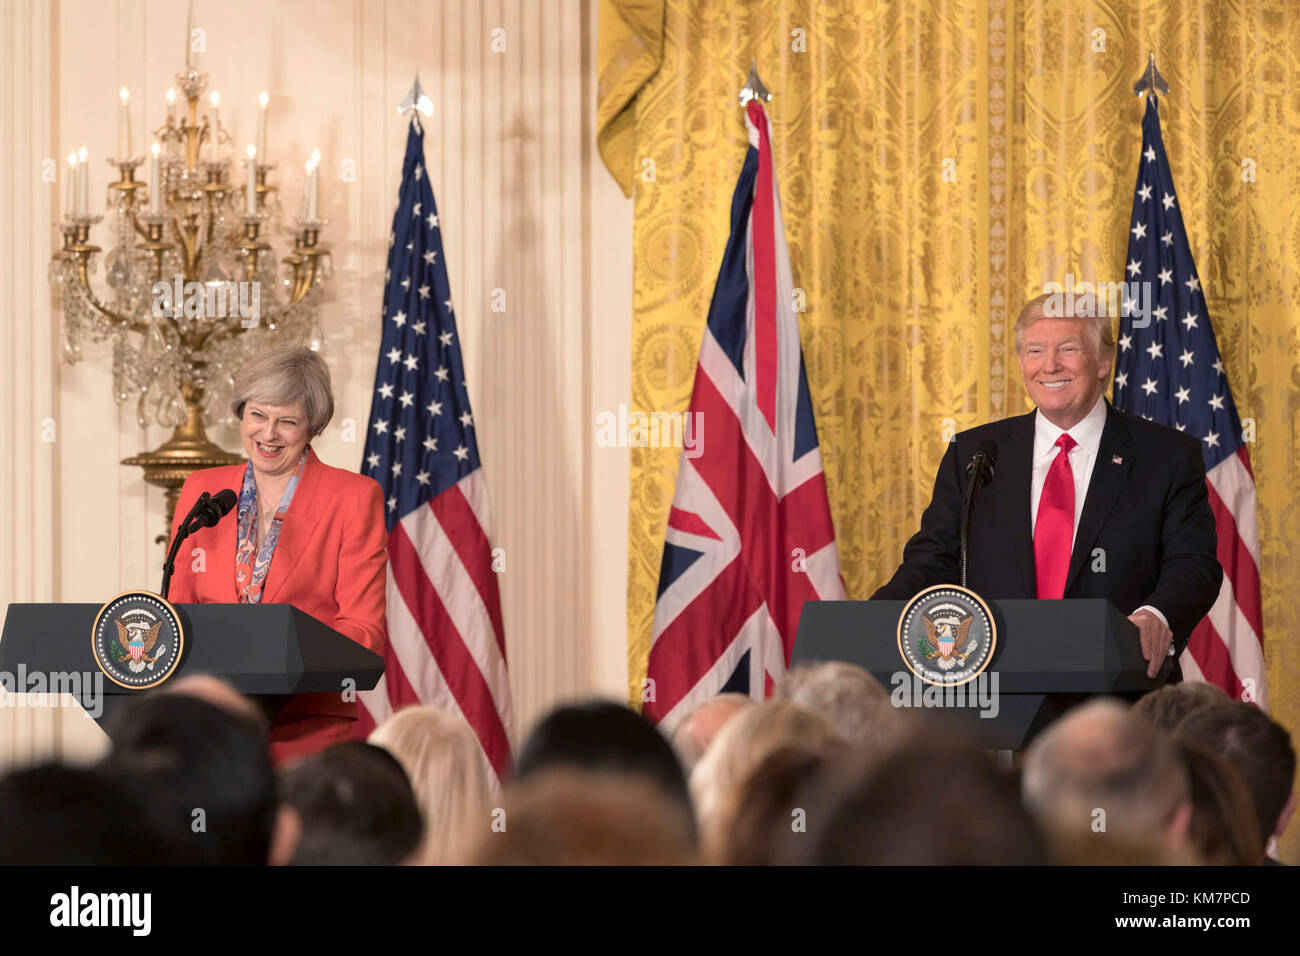 President Donald Trump and British Prime Minister Theresa May appear at a joint press conference, Friday, Jan. 27, 2017, in the East Room of the White House in Washington, D.C. Stock Photo